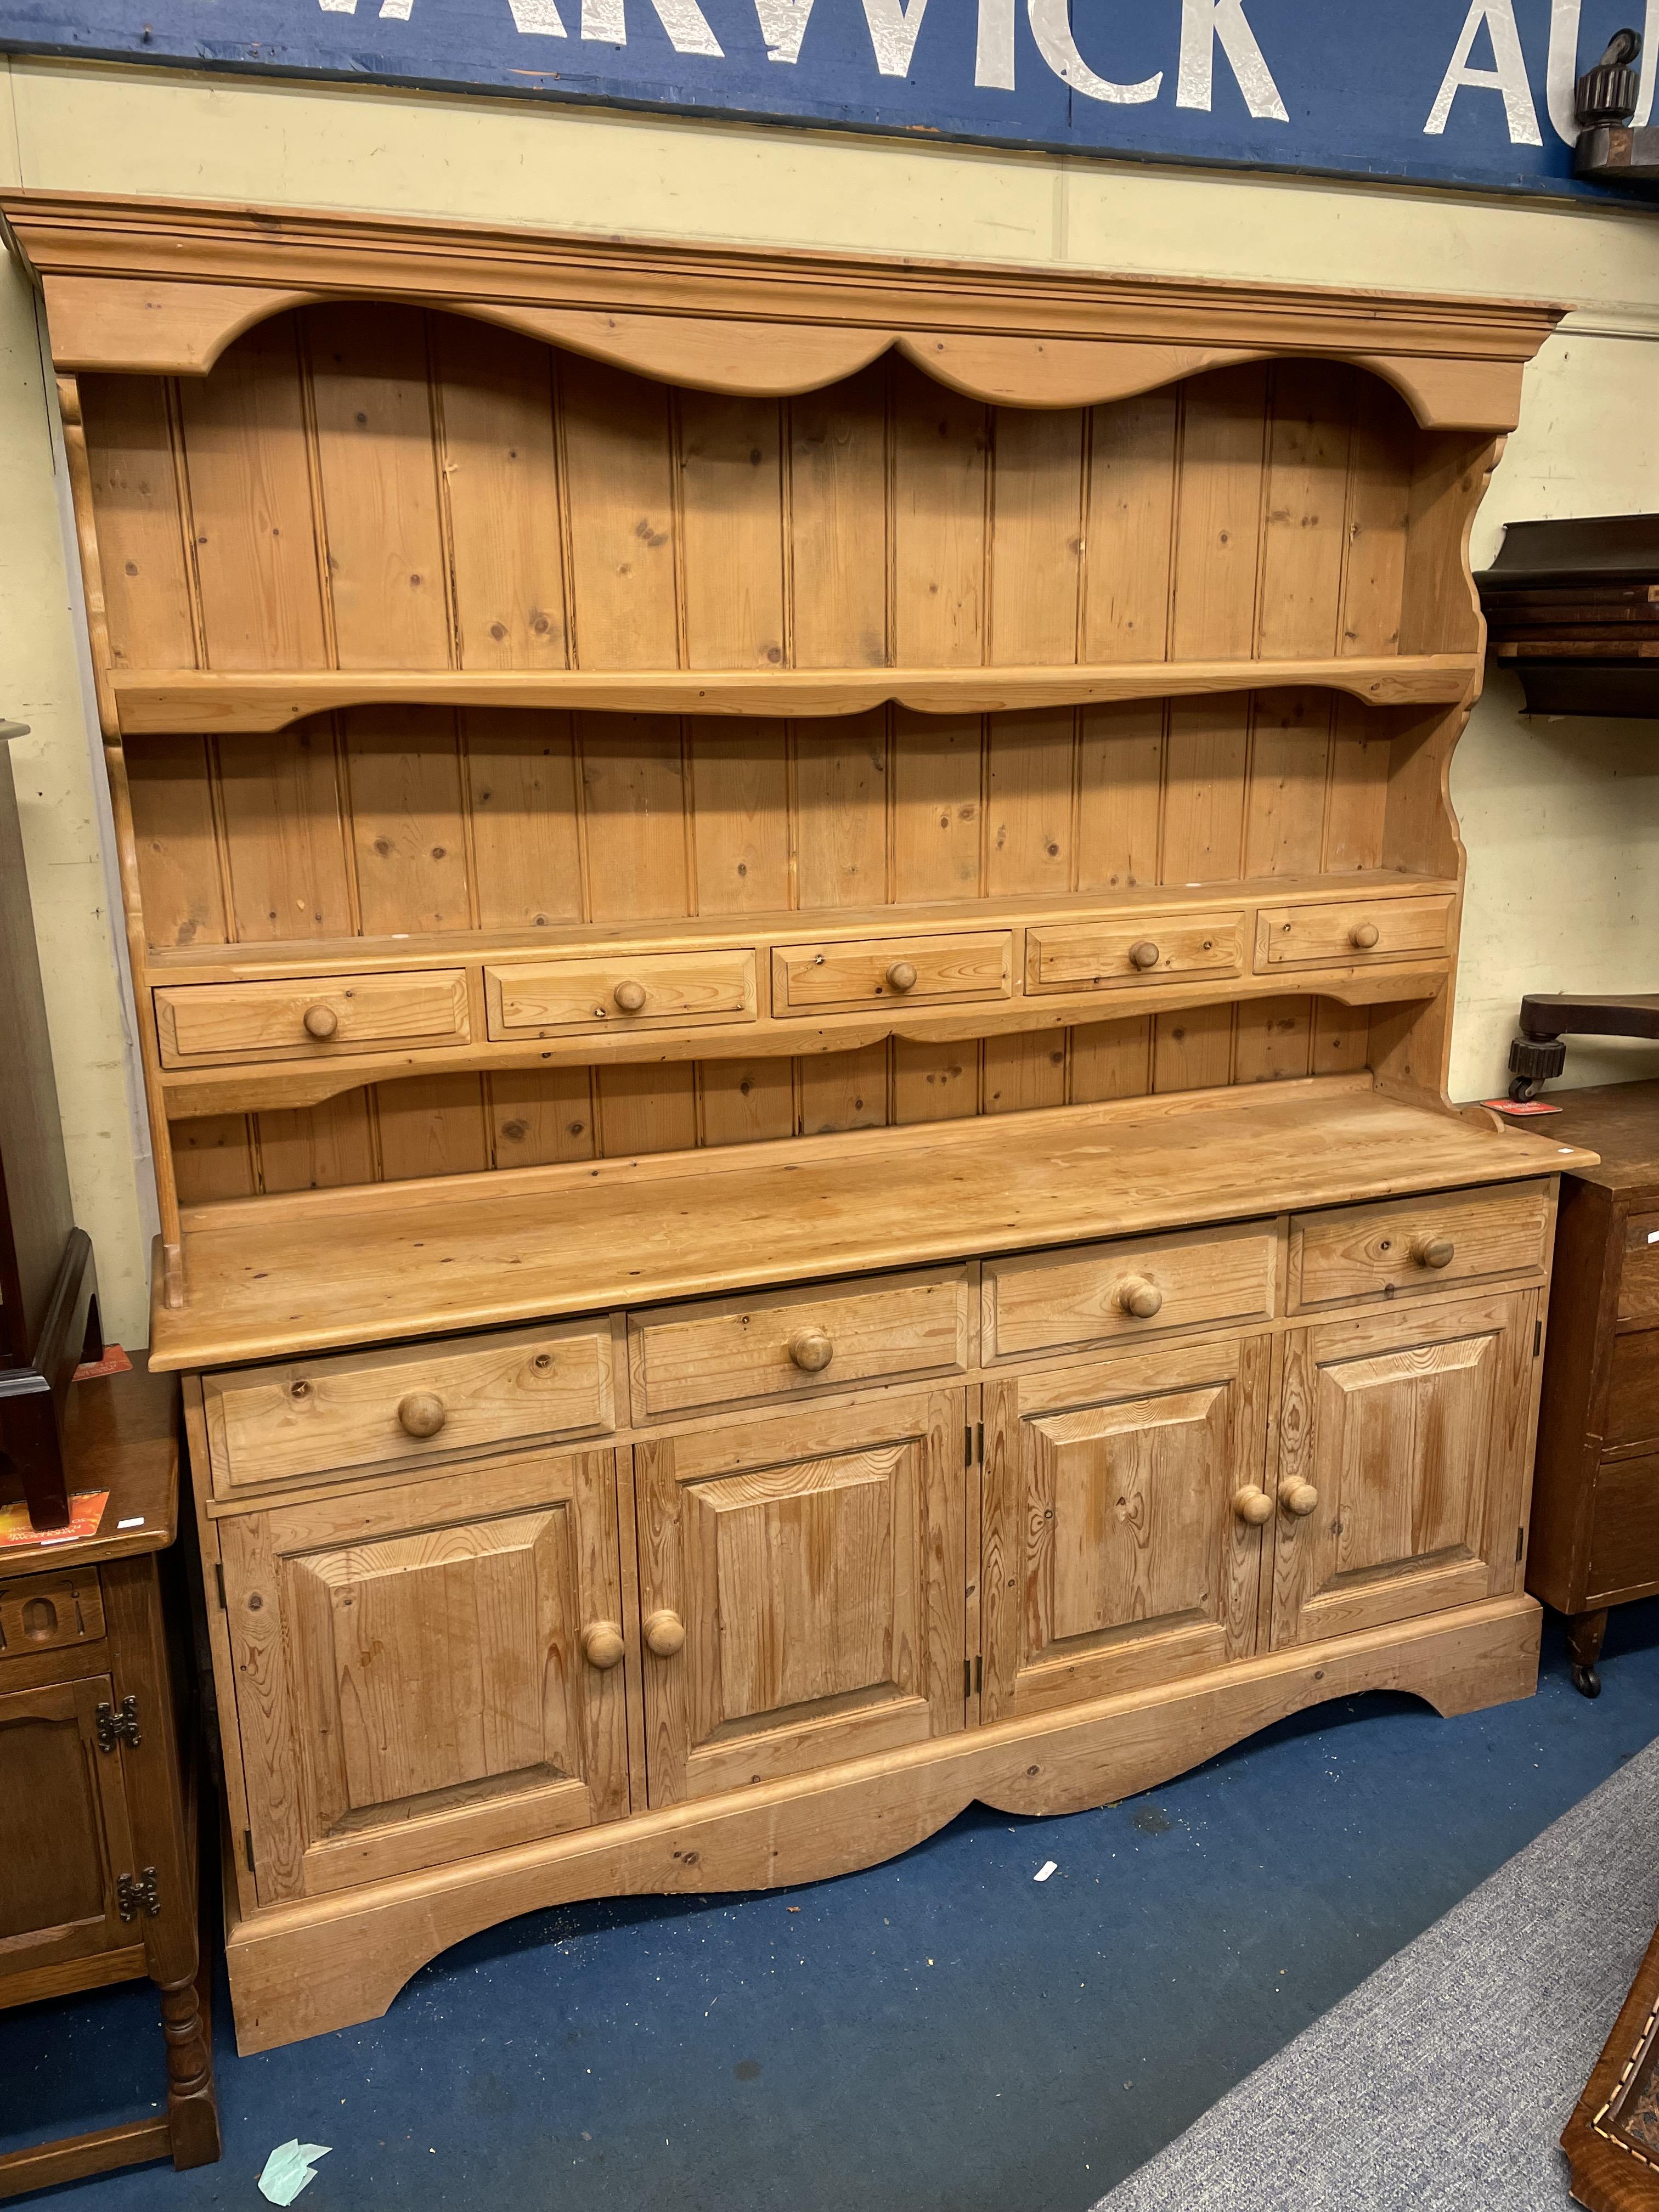 GOOD QUALITY PINE FARMHOUSE STYLE DRESSER WITH ENCLOSED RACK FITTED WITH DRAWERS - Image 2 of 6